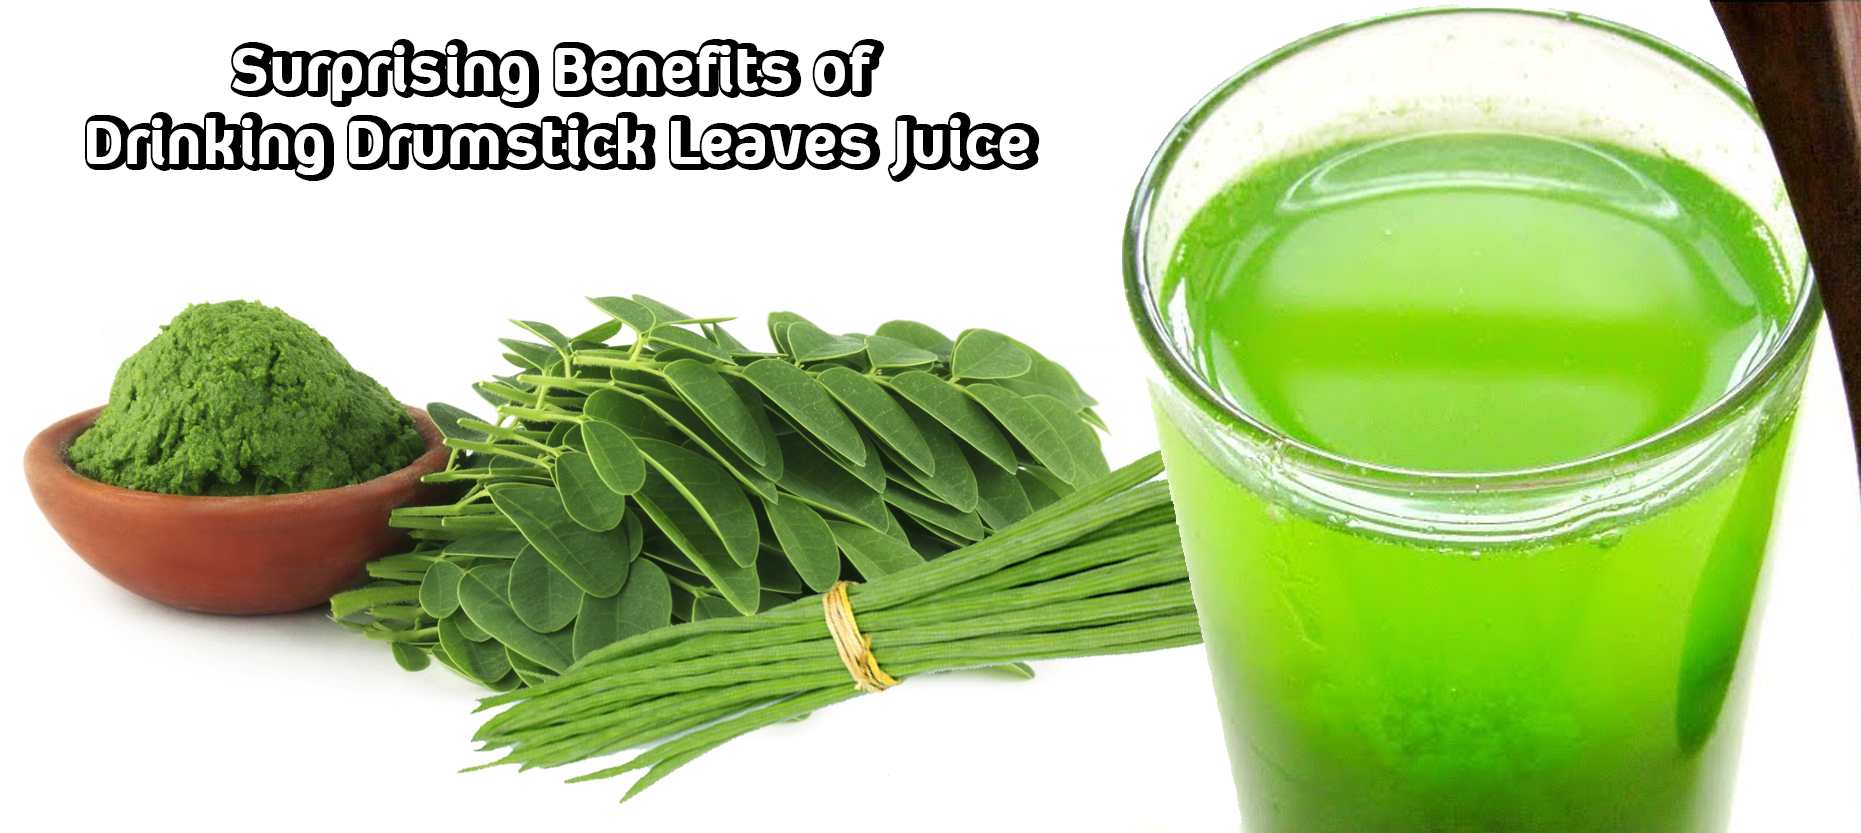 Surprising Benefits of Drinking Drumstick Leaves Juice Every Day